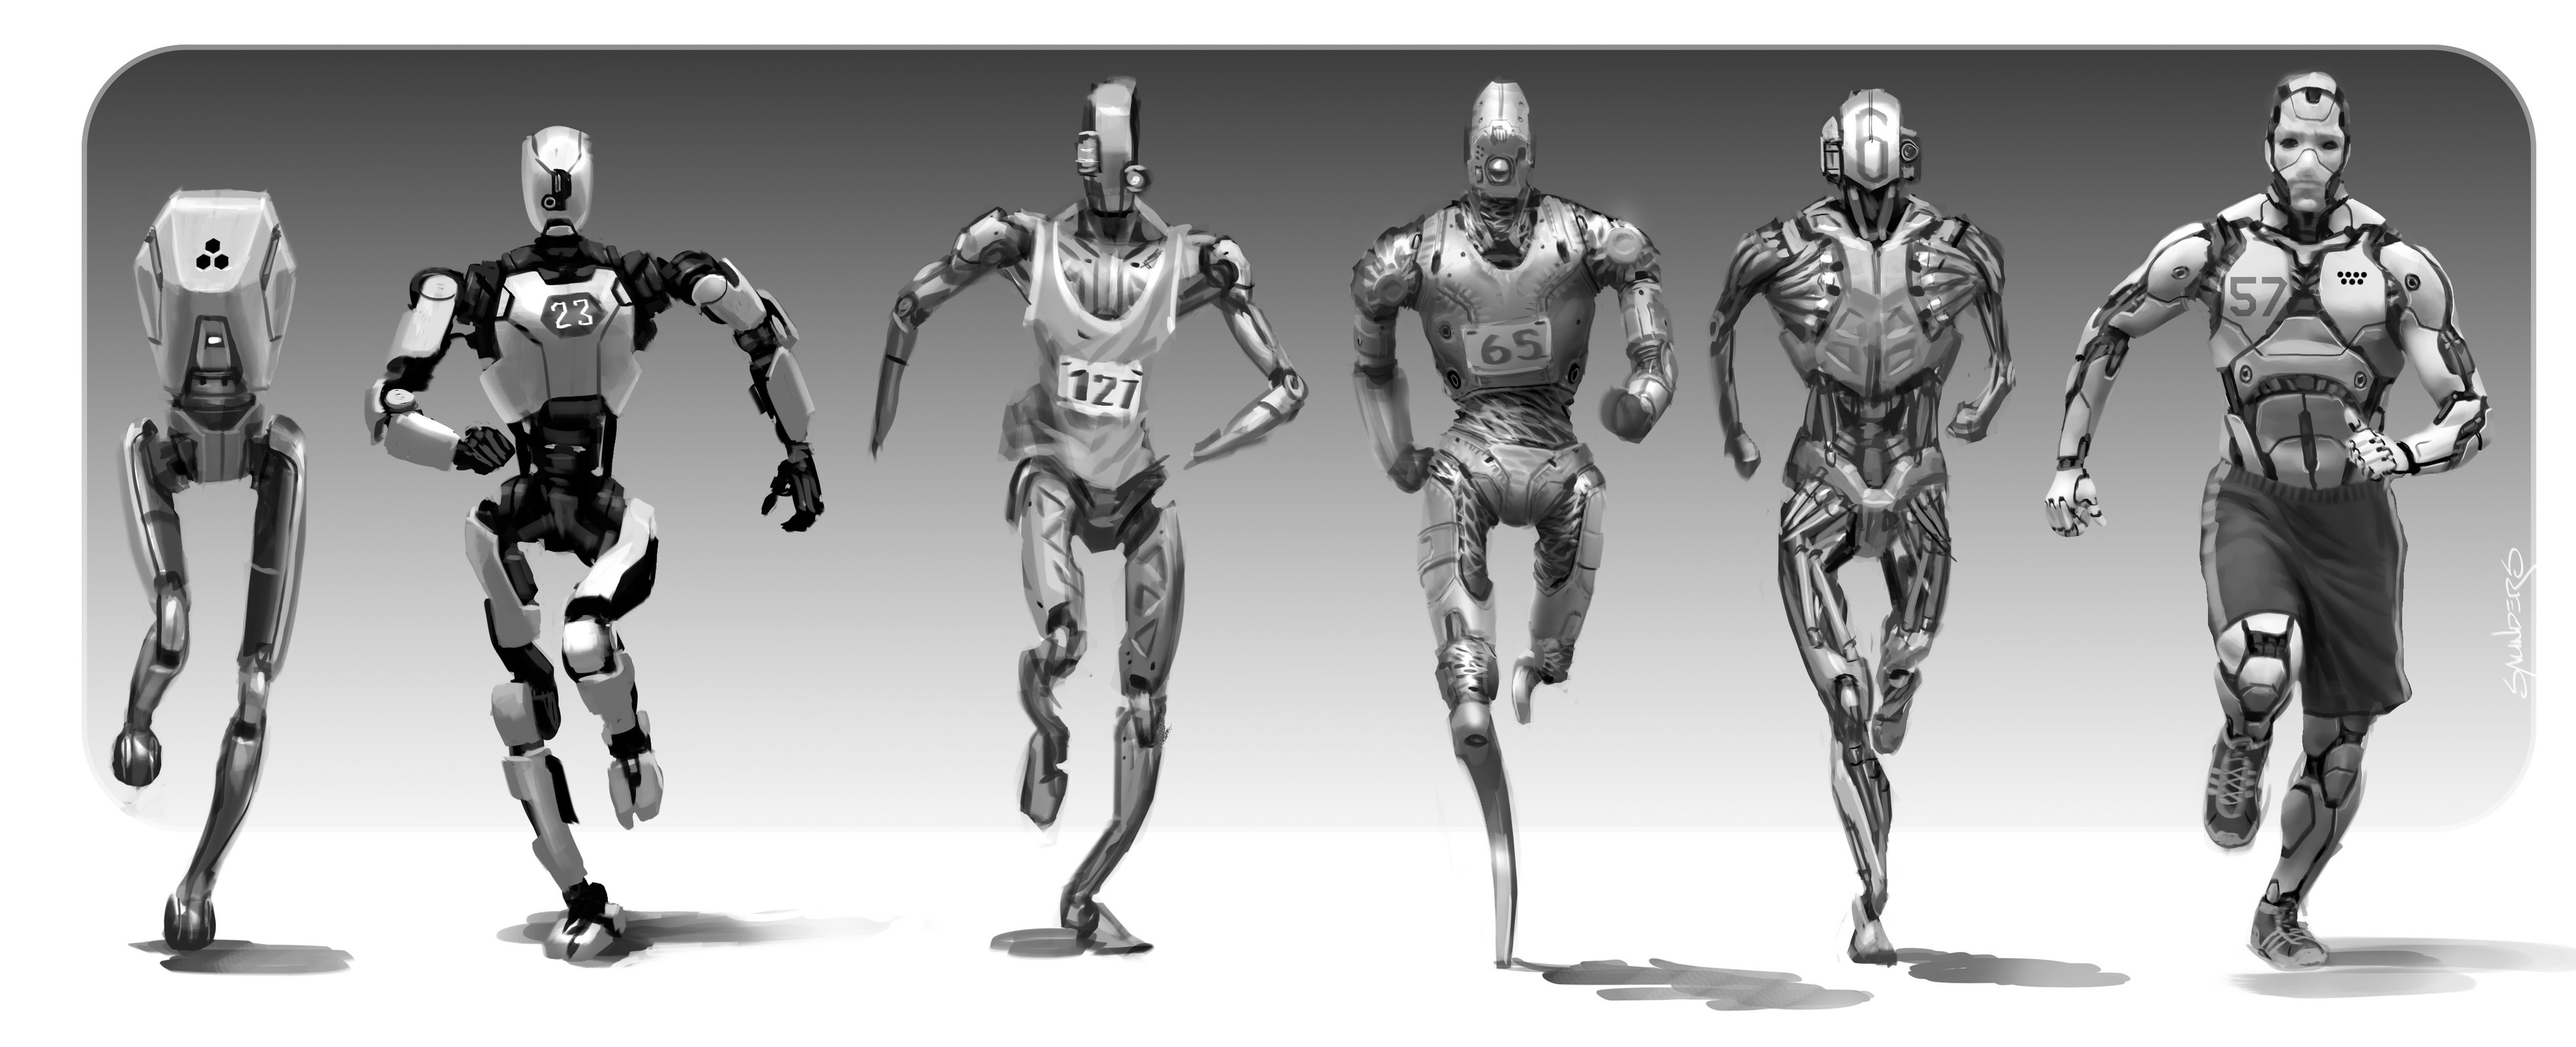 An early layout to show a range of anthropomorphizing of a runner robot. 